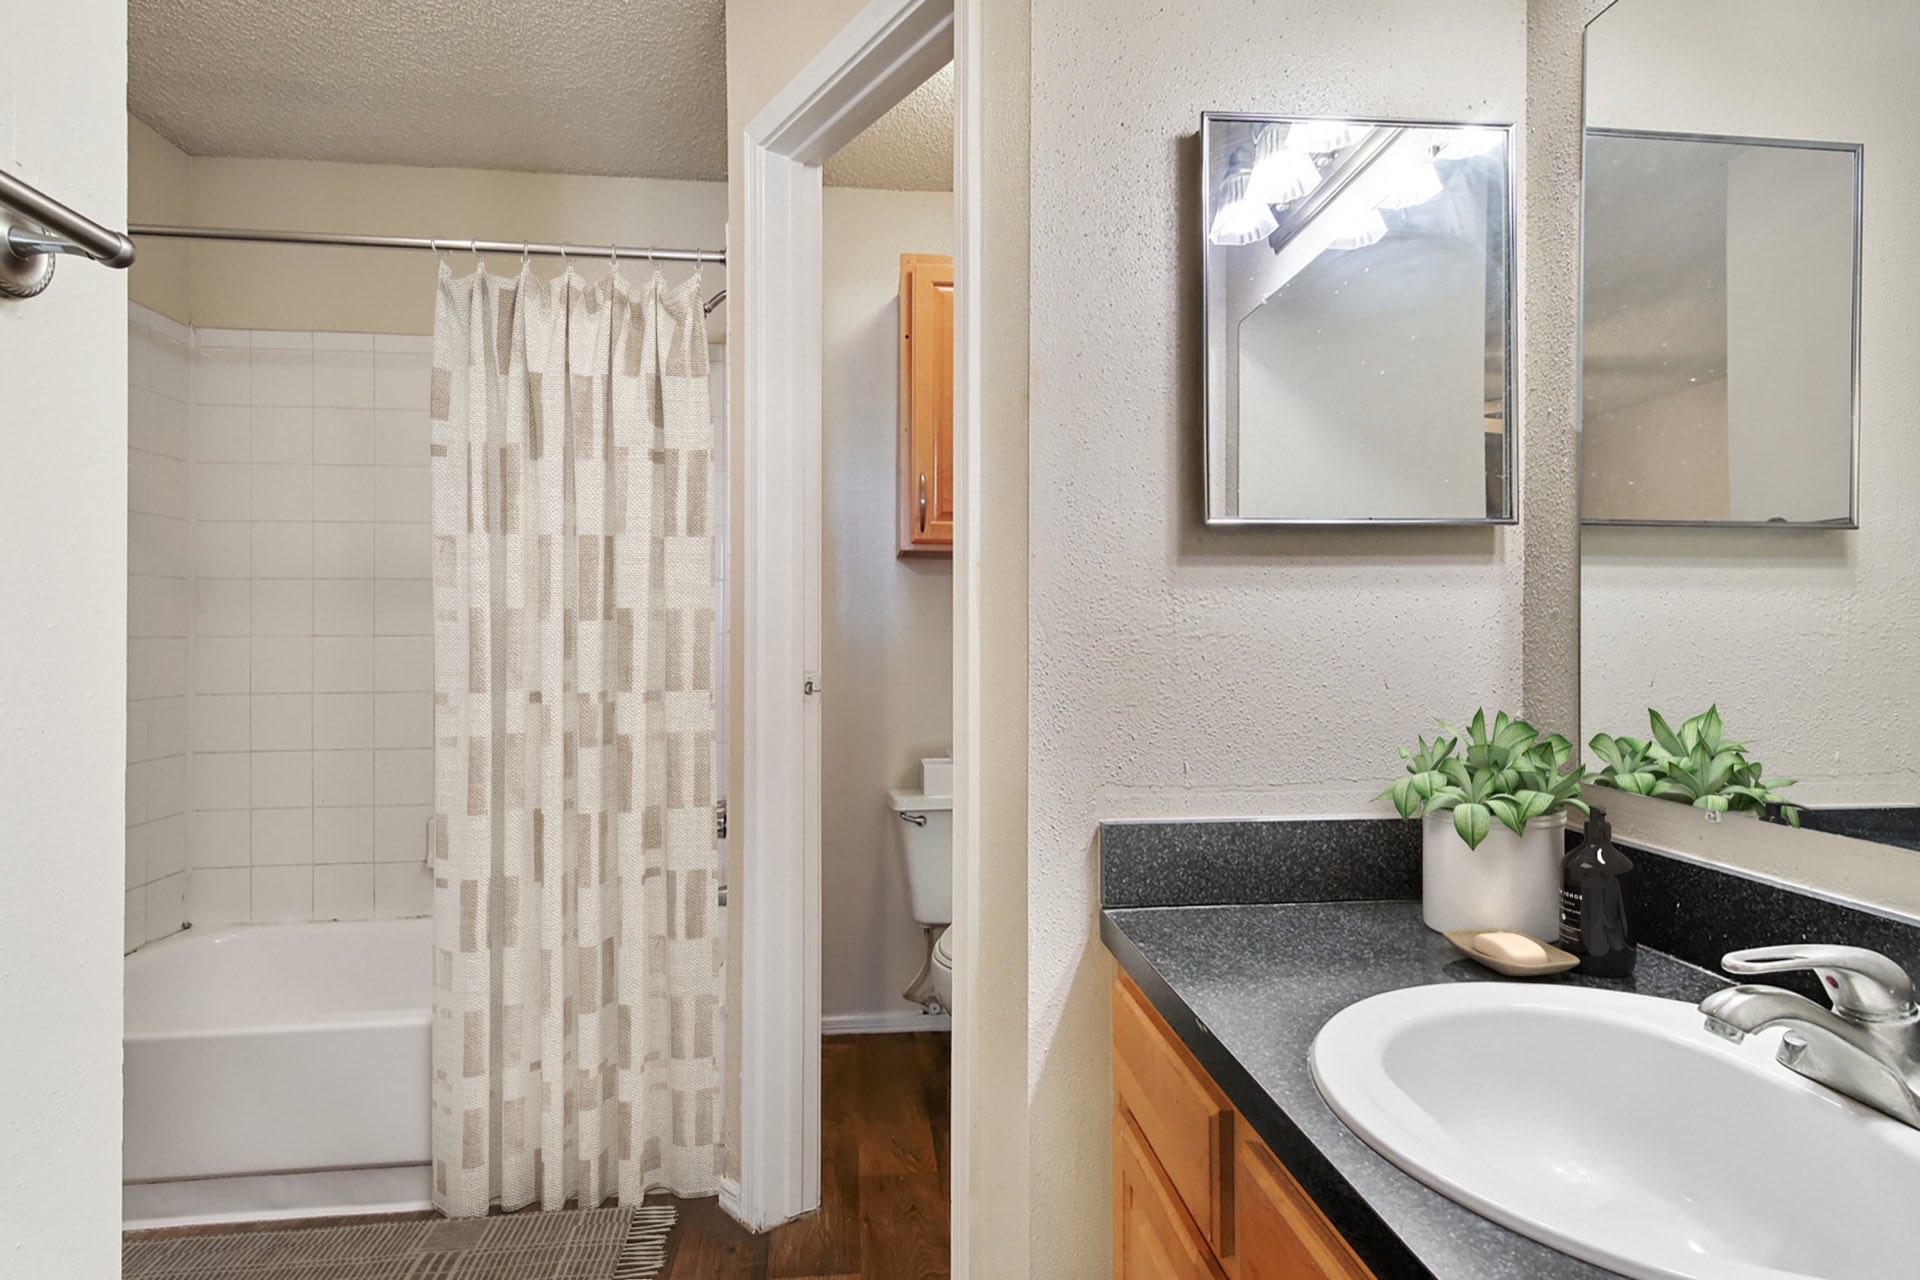 bathroom with laminate countertops and separate toilet closet